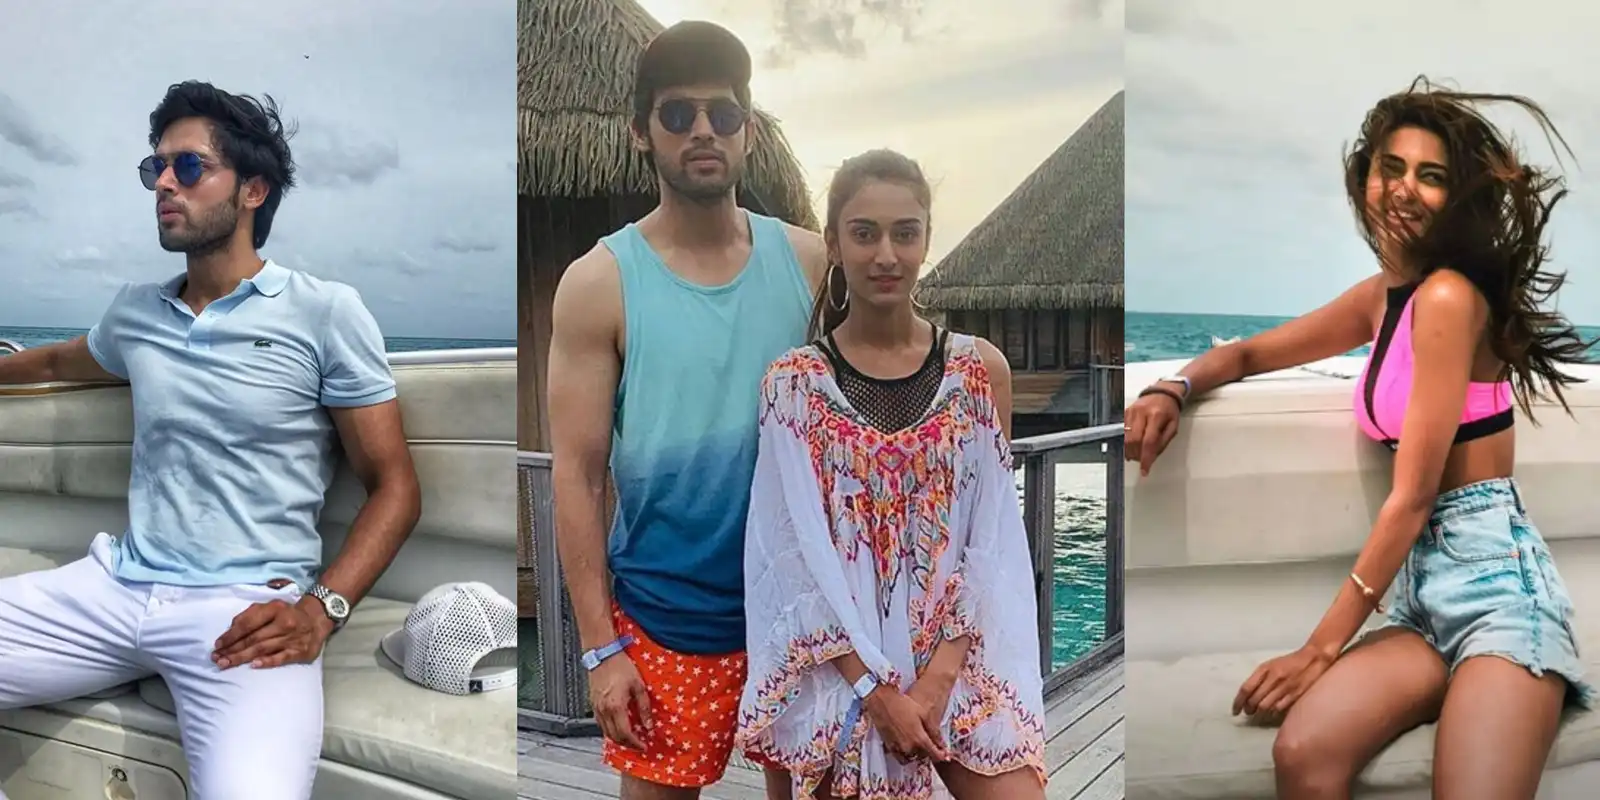 Parth Samthaan And Erica Fernandes Enjoy Quality Time In Maldives! See Pictures...